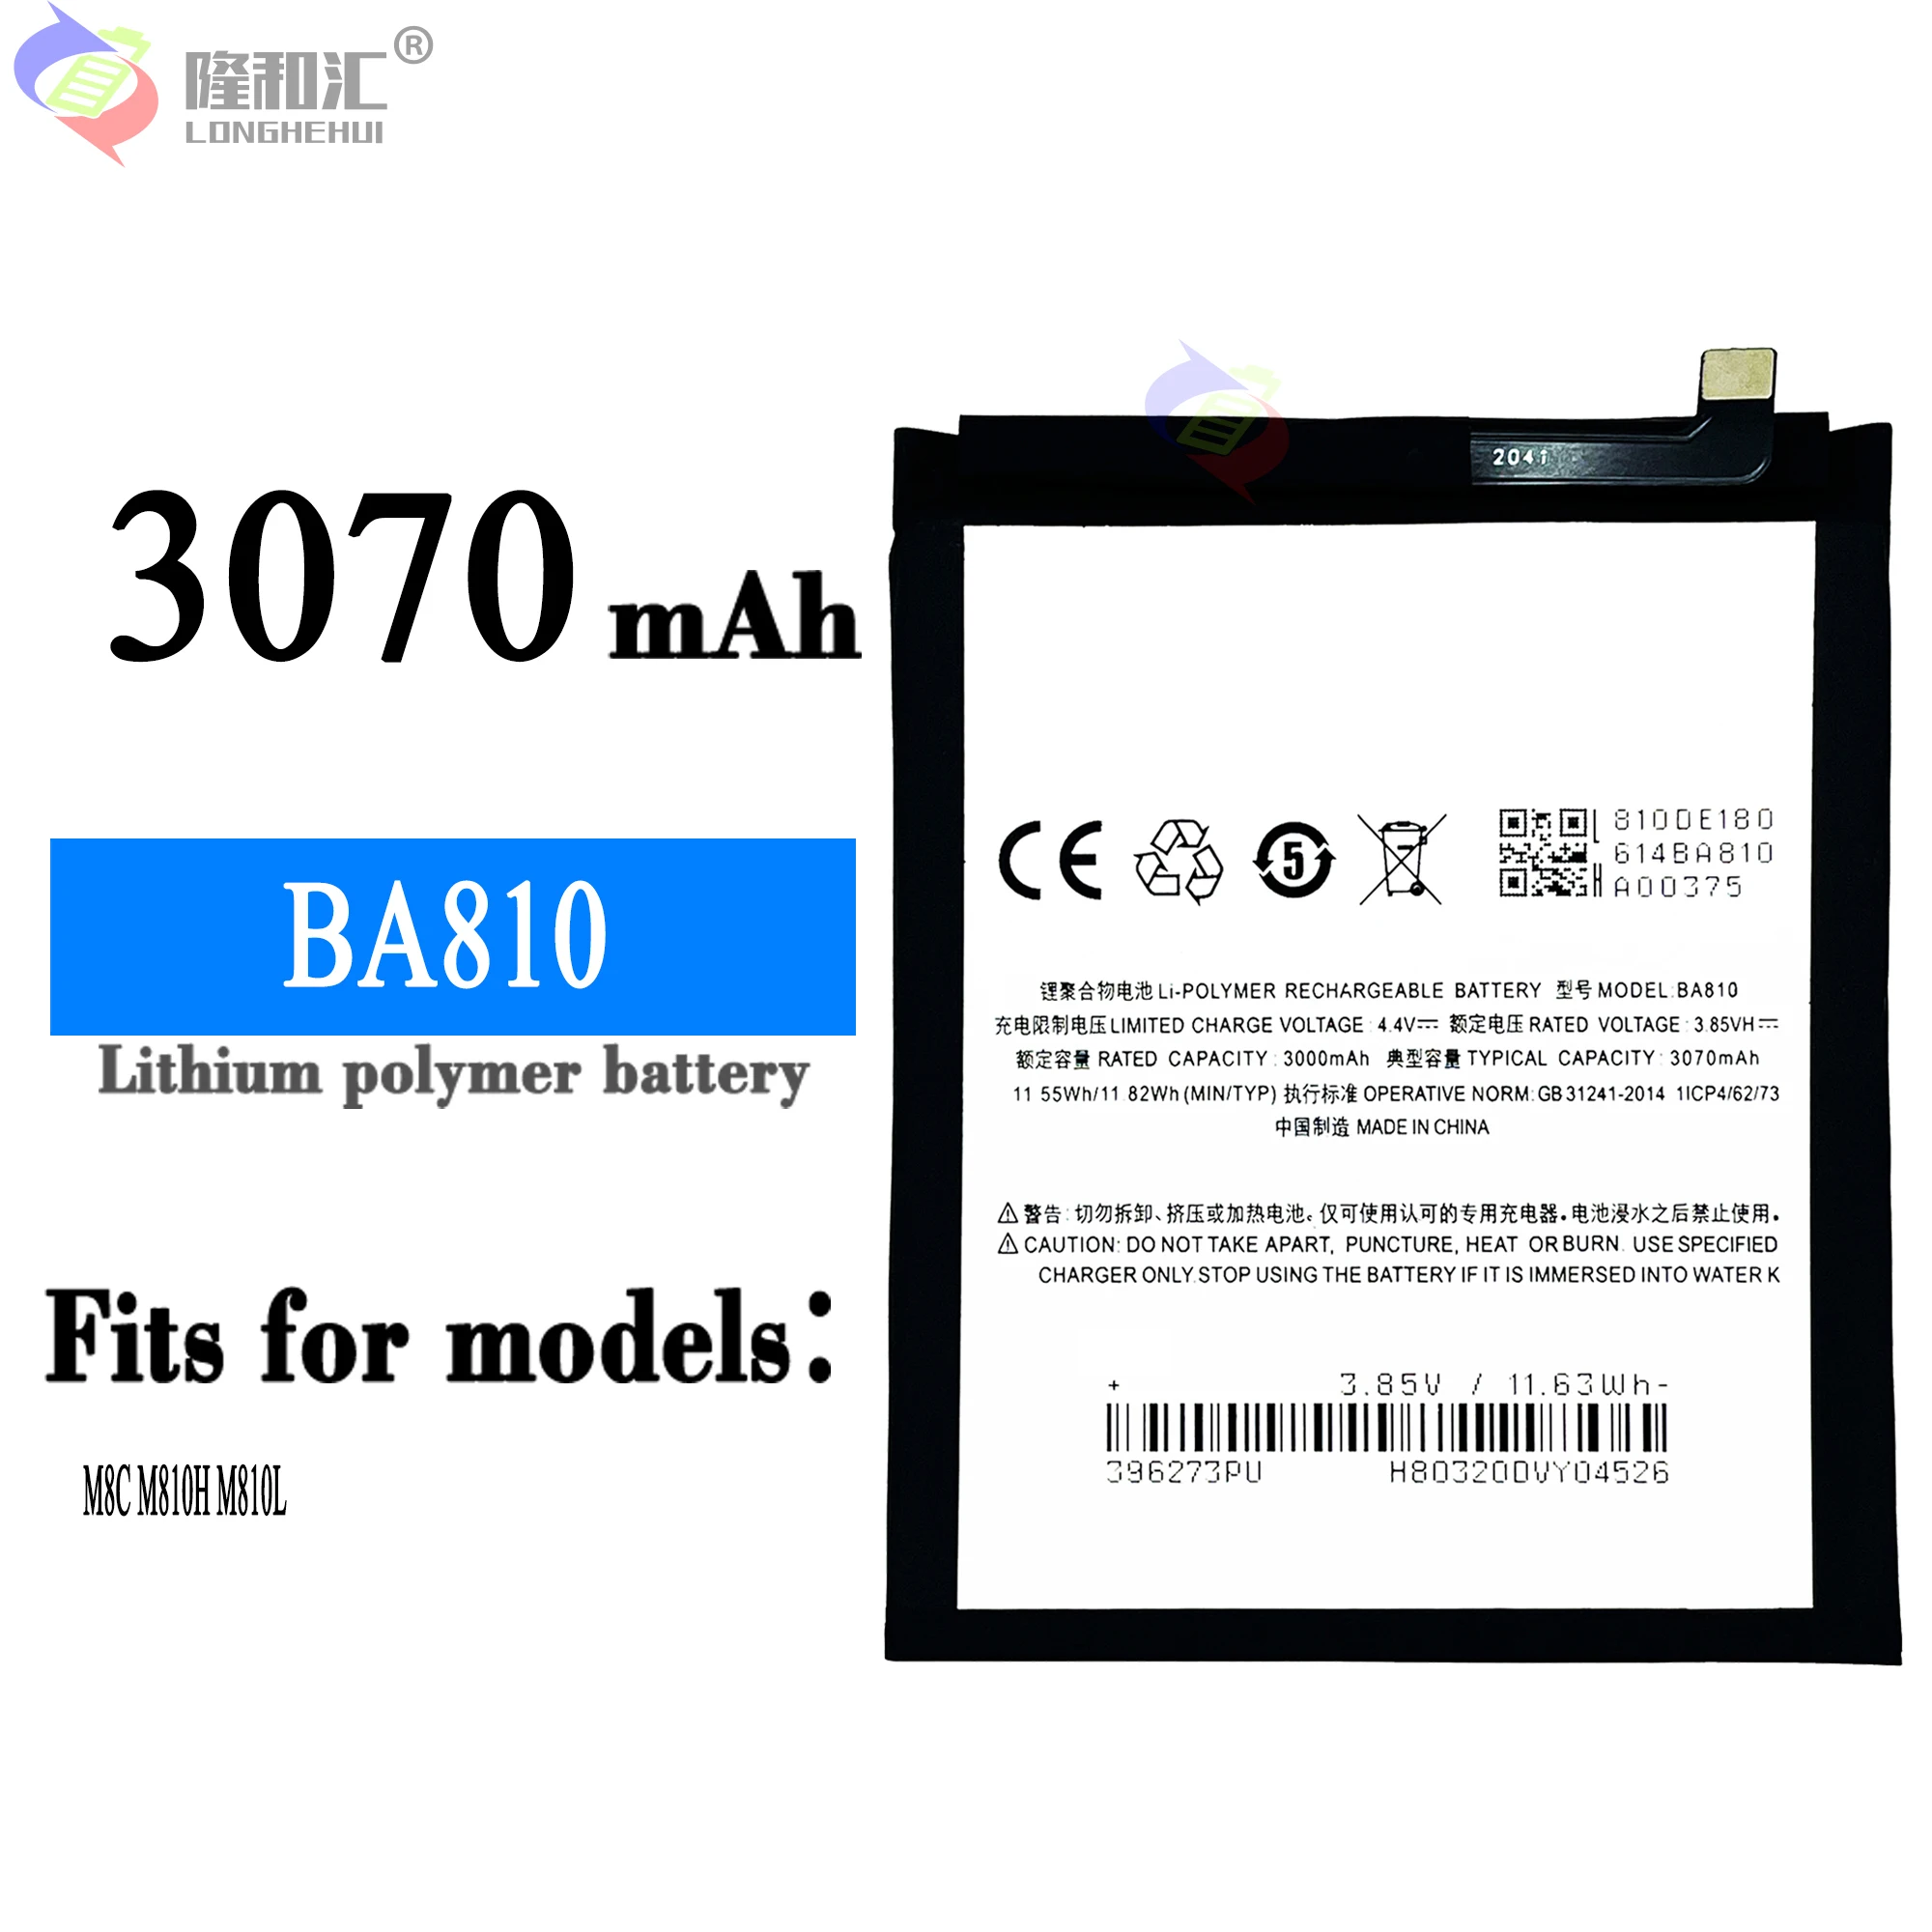 100% Original 3070mAh BA810 Battery For Meizu M8C M810H Mobile Phone Fast delivery+Tracking number